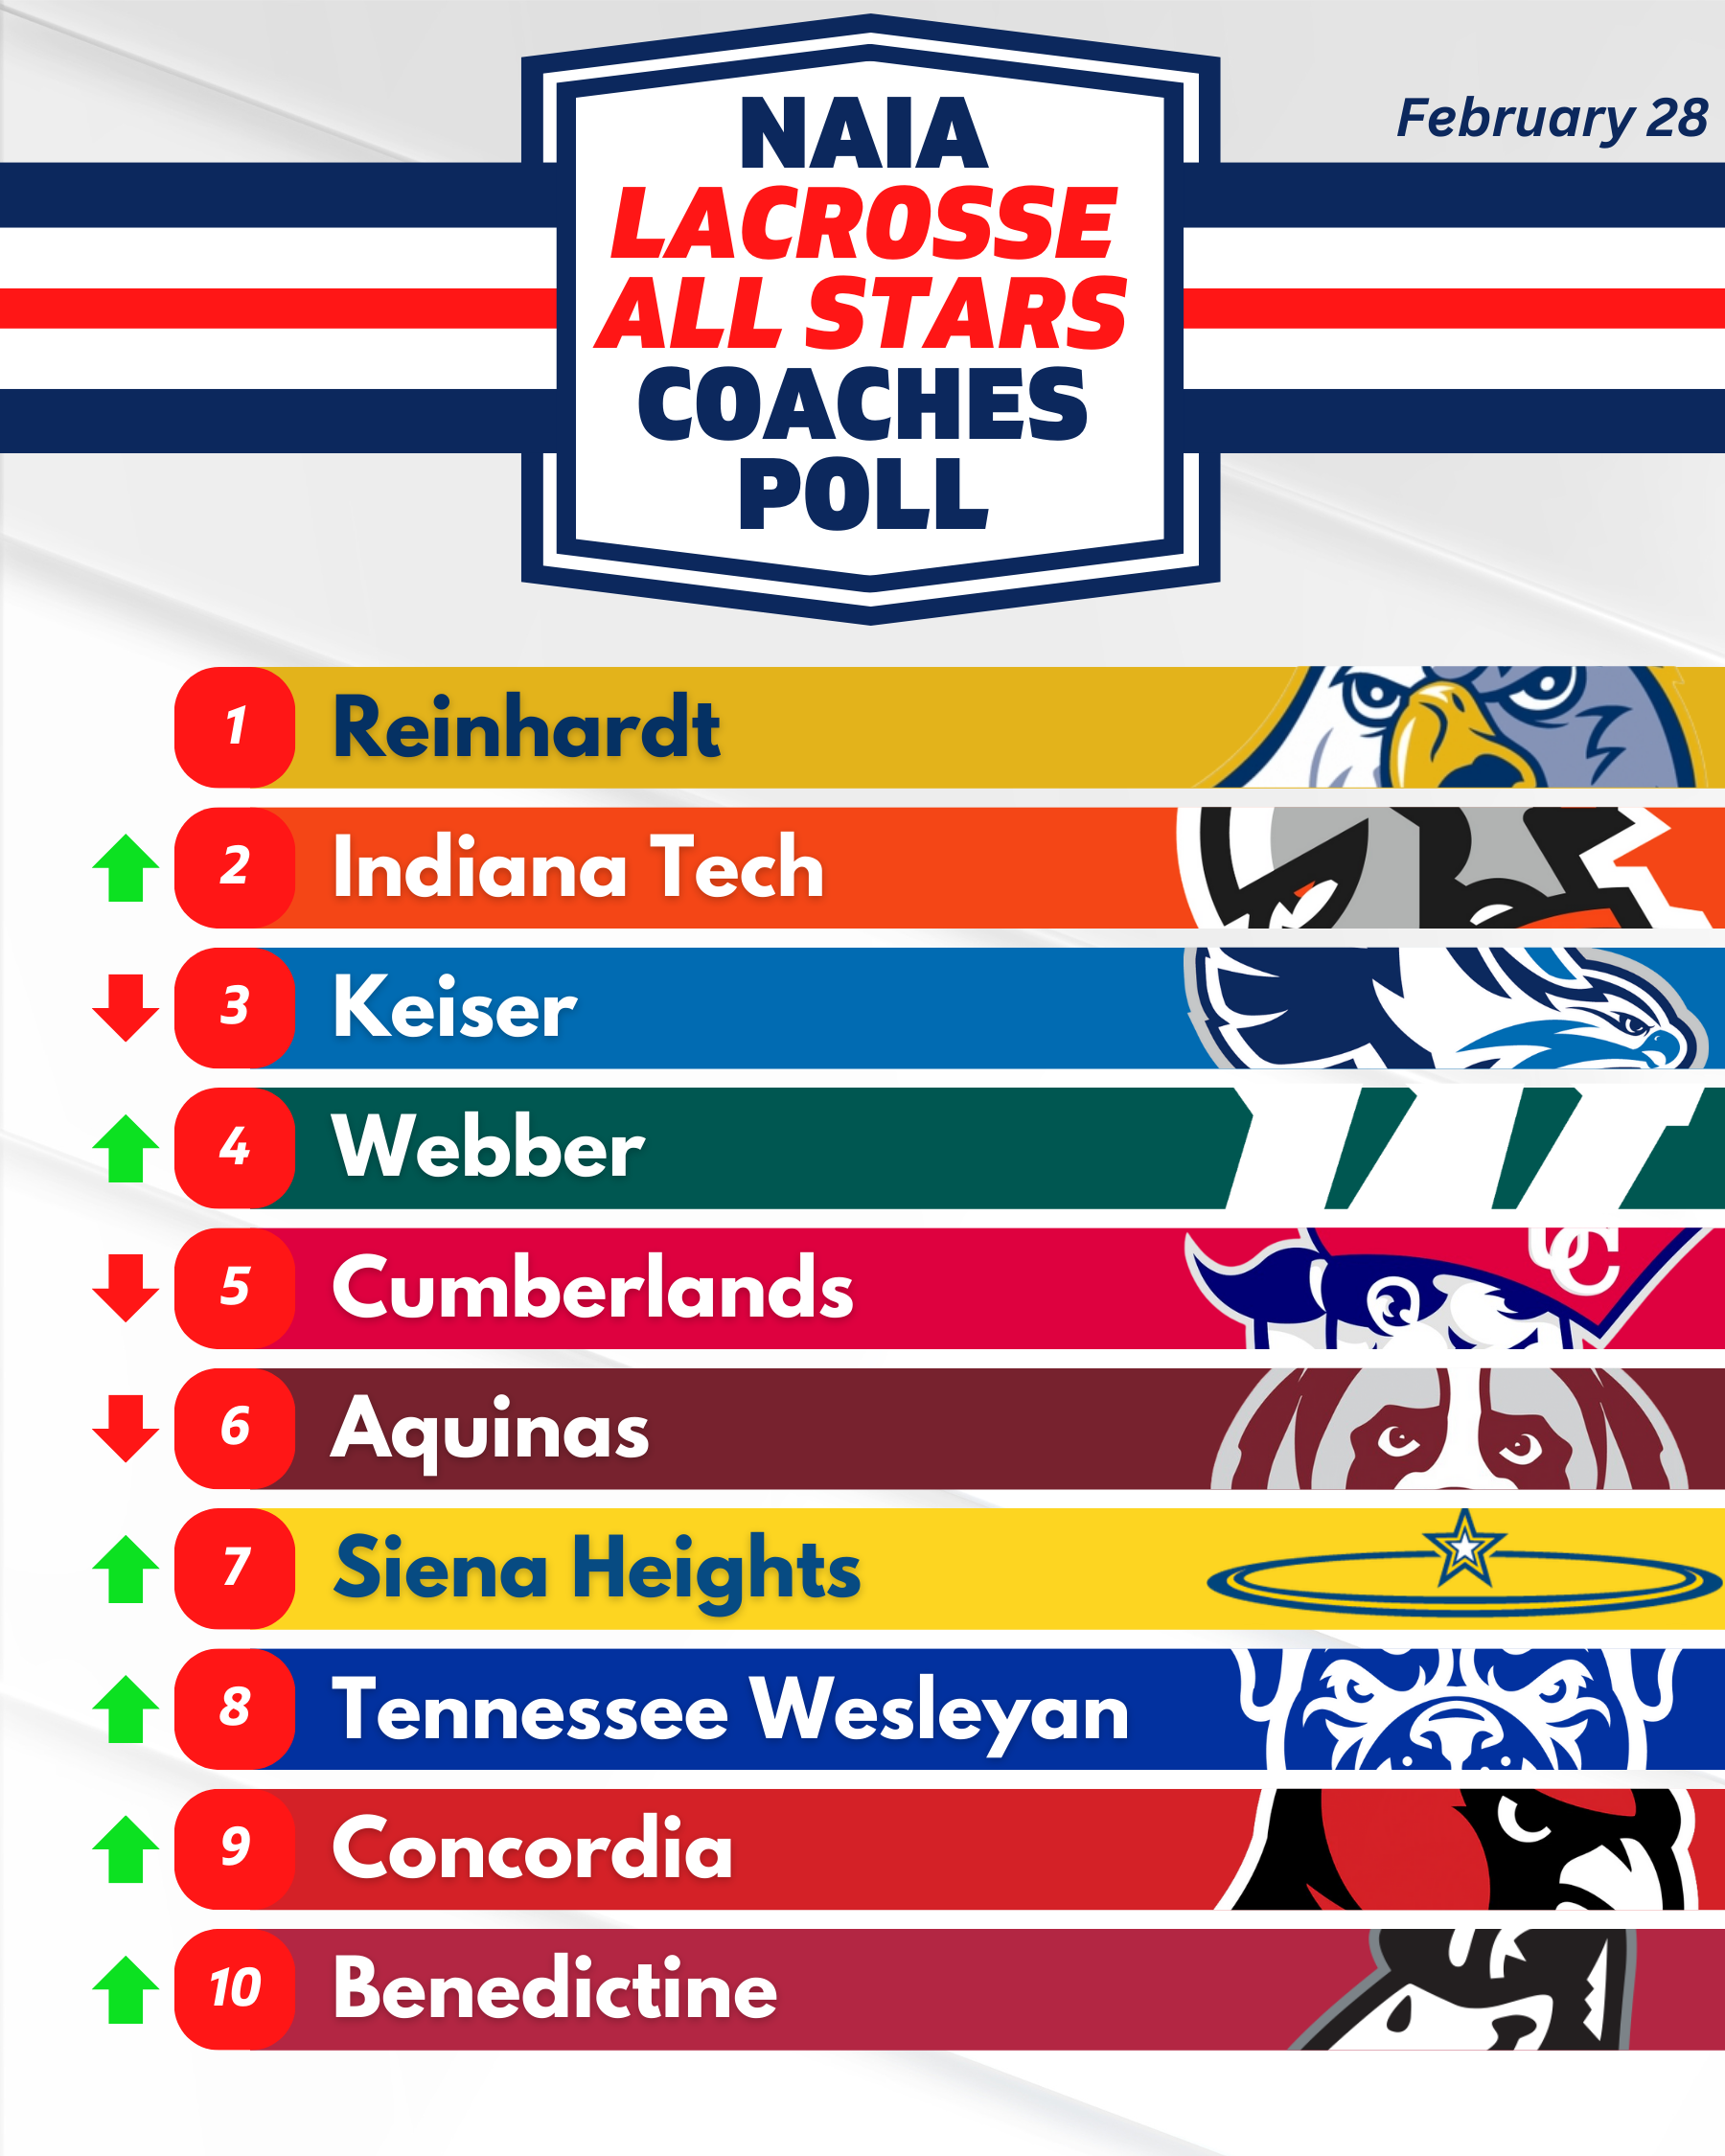 Webber Looks GOOD NAIA Lacrosse All Stars Coaches Poll Lacrosse All